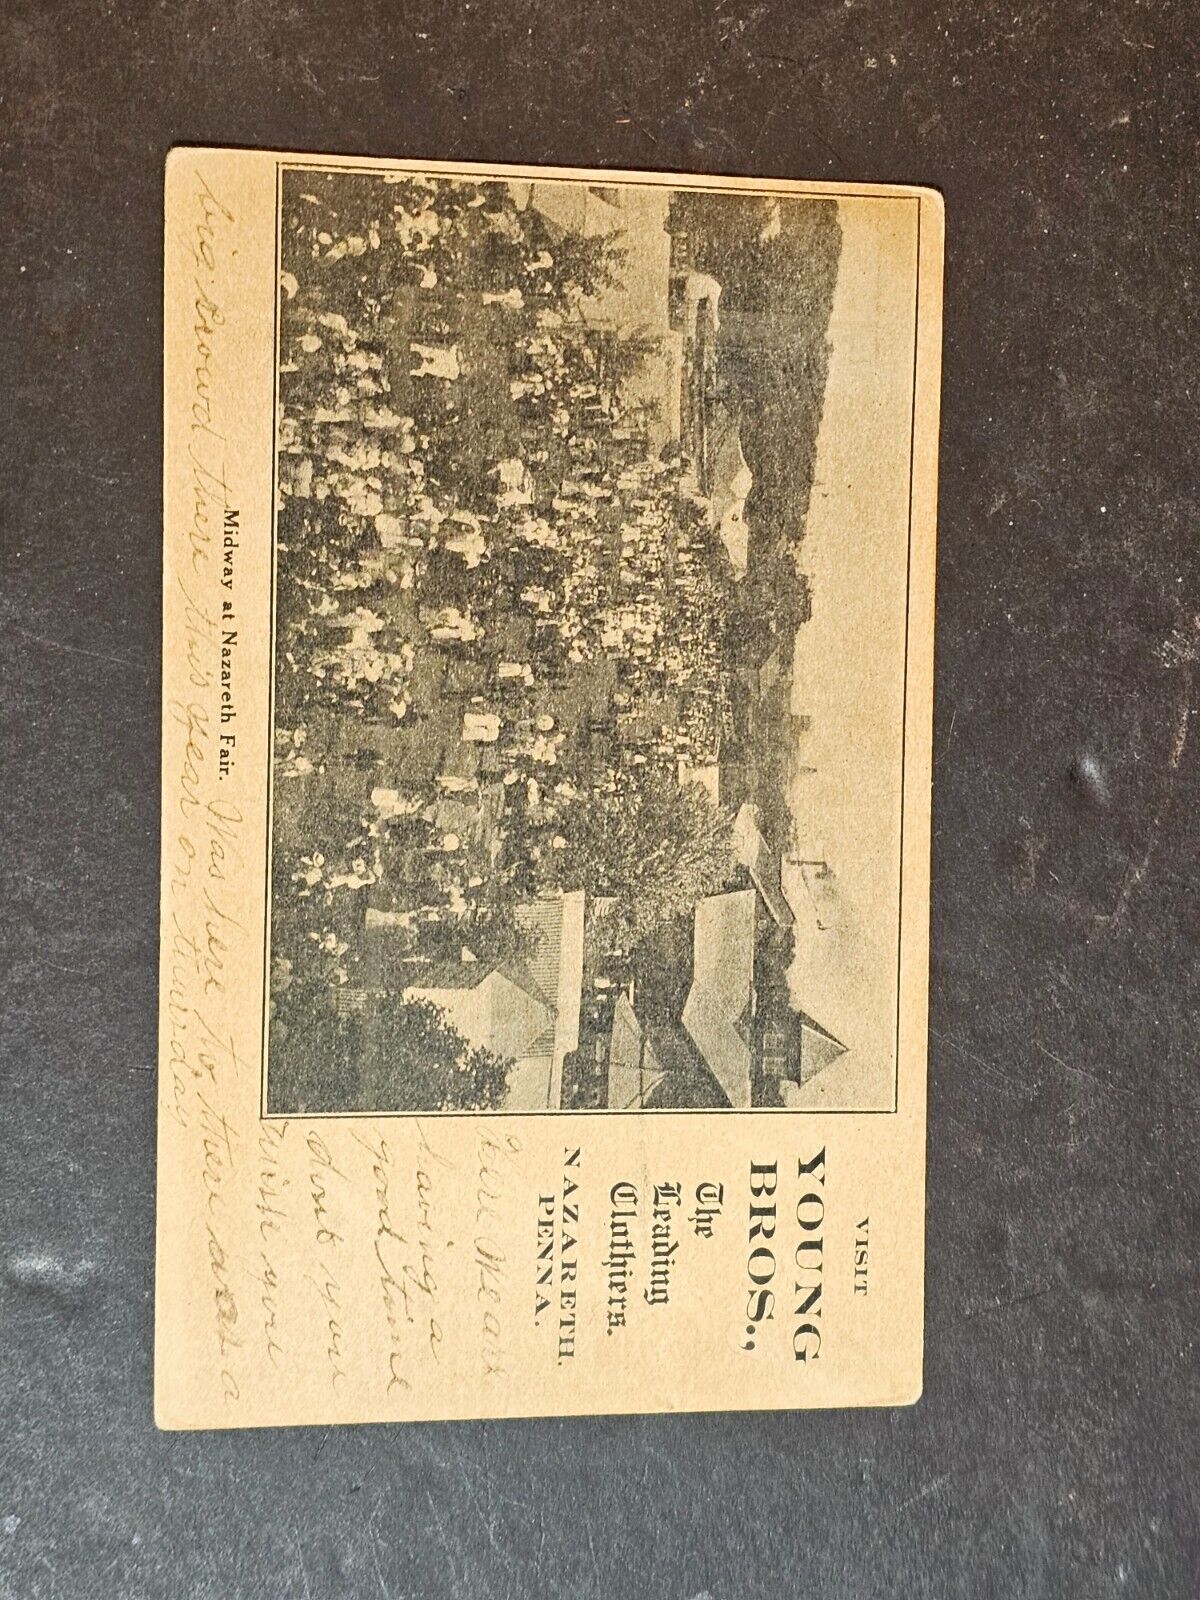 Nazareth Pa post card used young Brothers Nazareth fair